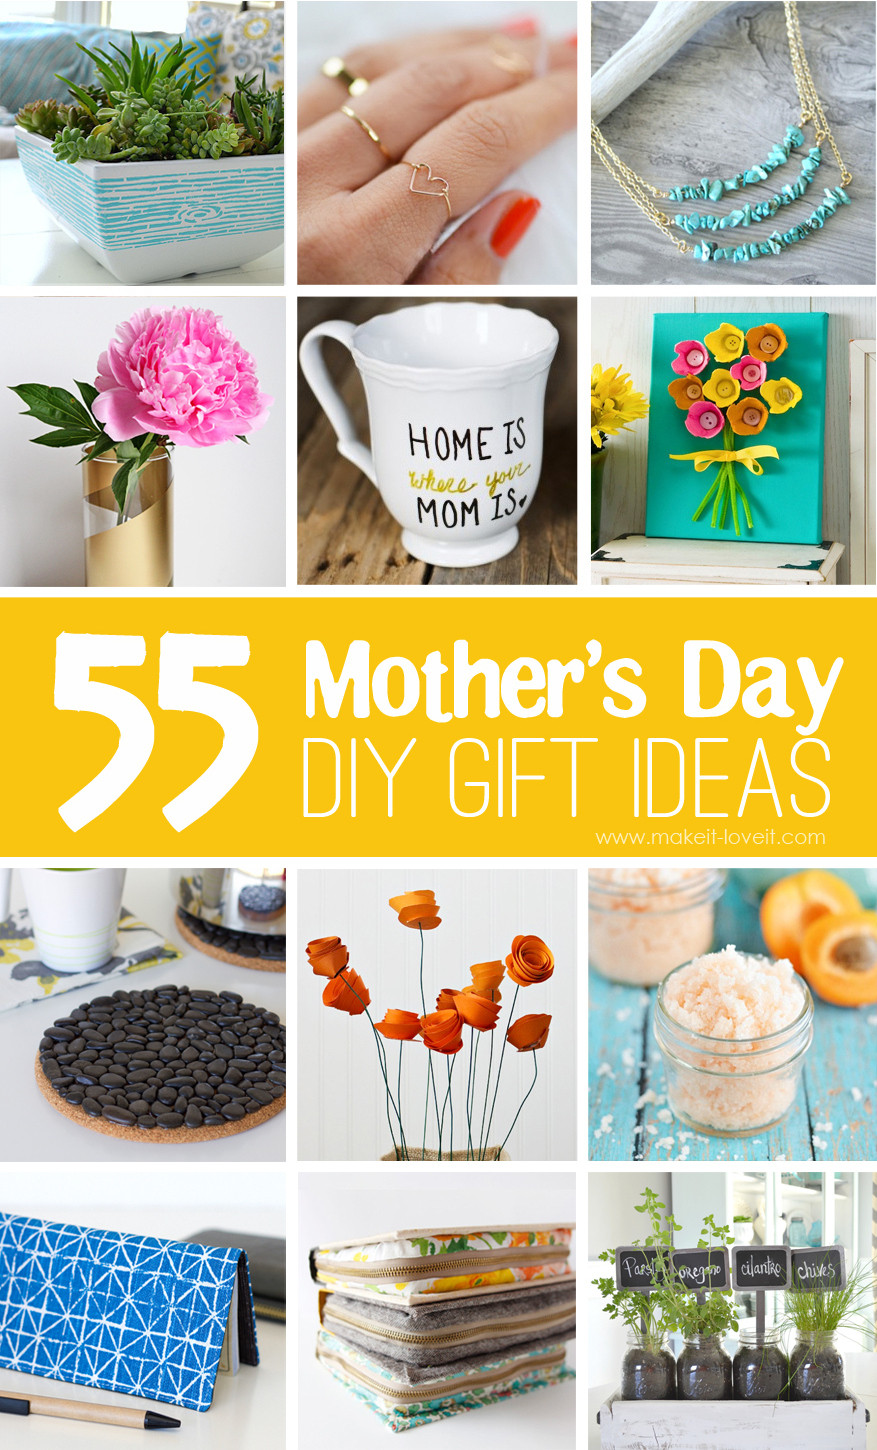 Mother'S Day Gift Ideas To Make At Home
 55 Mother s Day DIY Gift Ideas